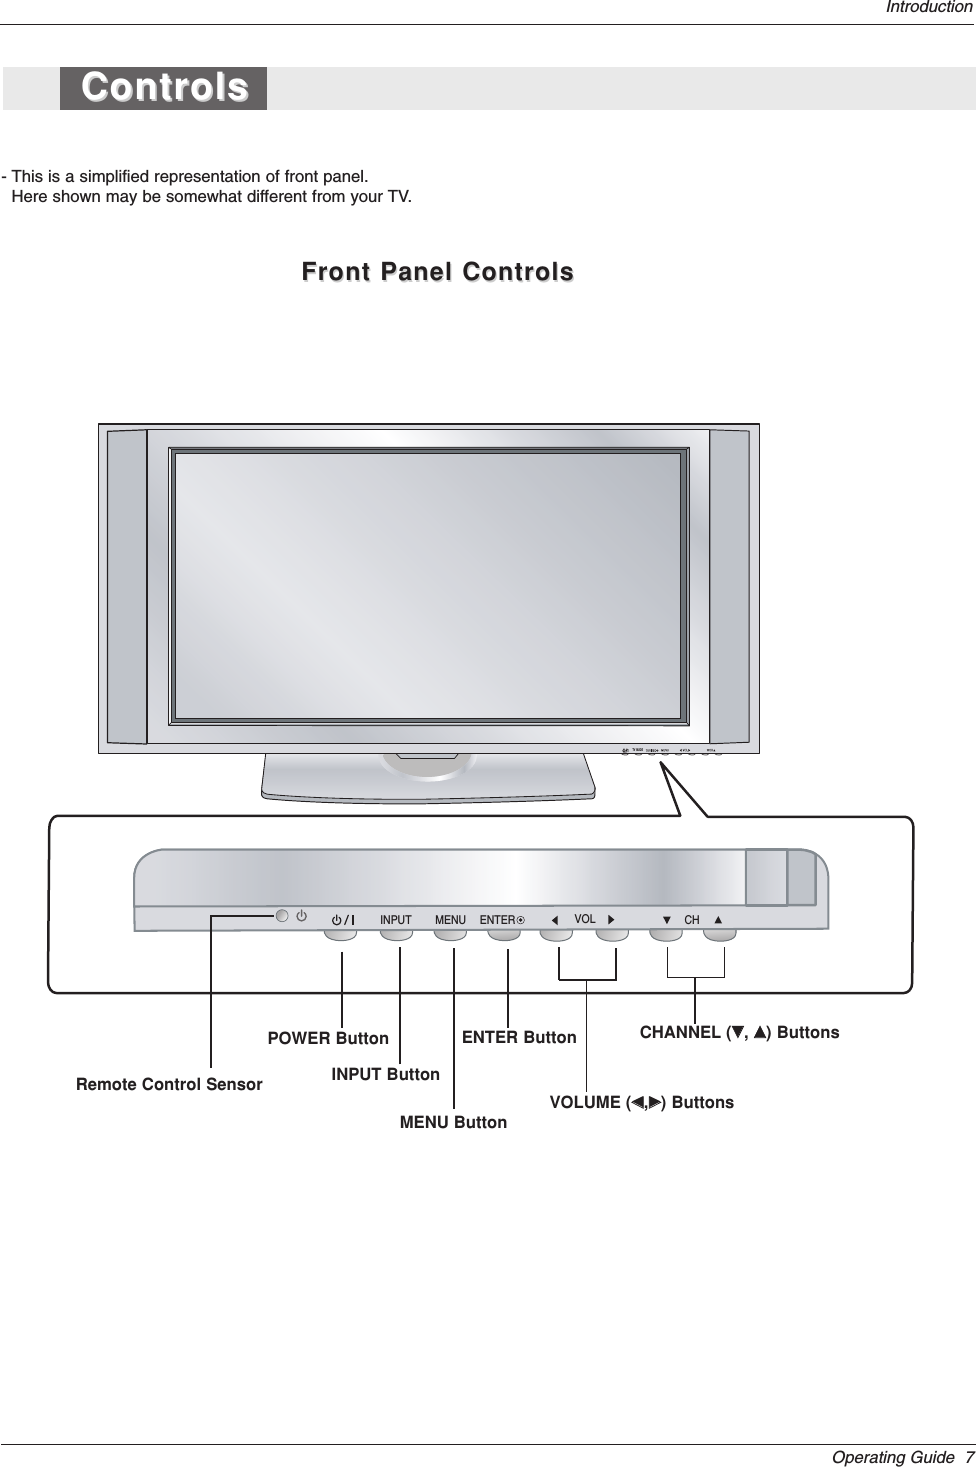 Operating Guide  7Introduction- This is a simplified representation of front panel. Here shown may be somewhat different from your TV.ControlsControlsFront Panel ControlsFront Panel ControlsTV GUIDECHVOLMENUINPUT ENTERPOWER ButtonRemote Control SensorVOLUME (FF,GG) ButtonsCHANNEL (EE, DD) ButtonsMENU ButtonINPUT ButtonENTER Button